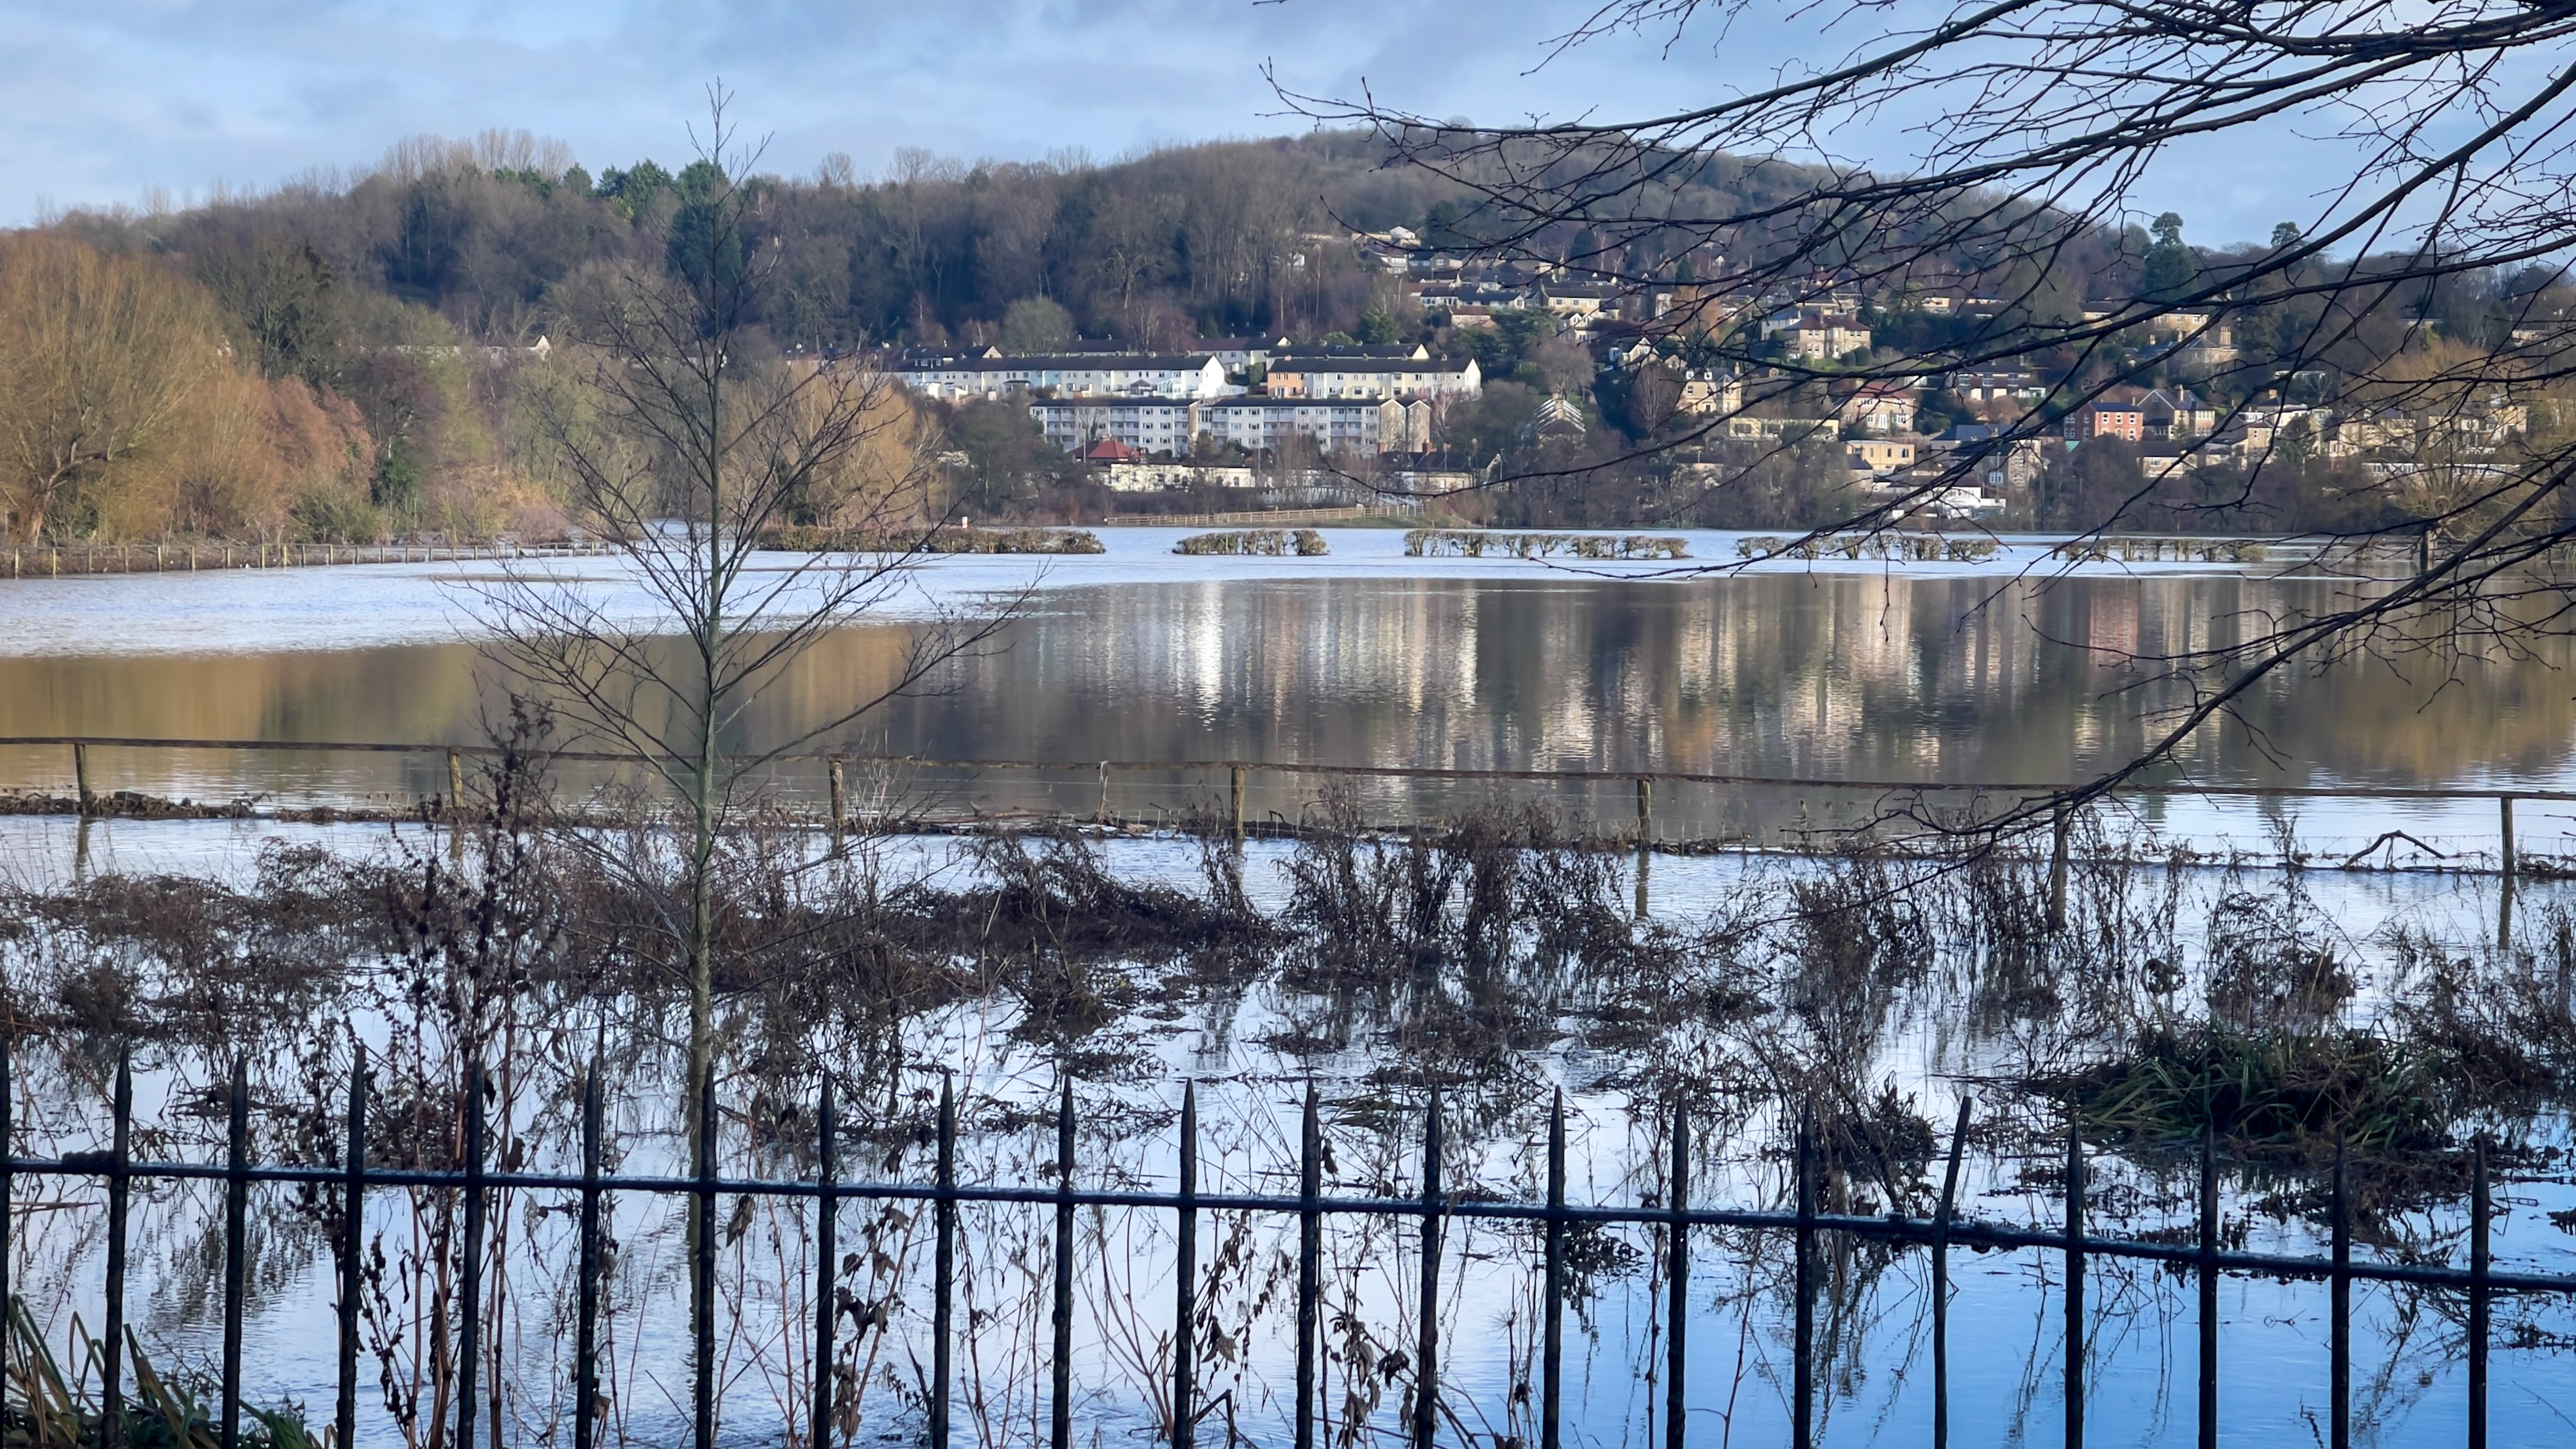 Flood water surrounds Bathampton, located adjacent to the River Avon which burst its banks